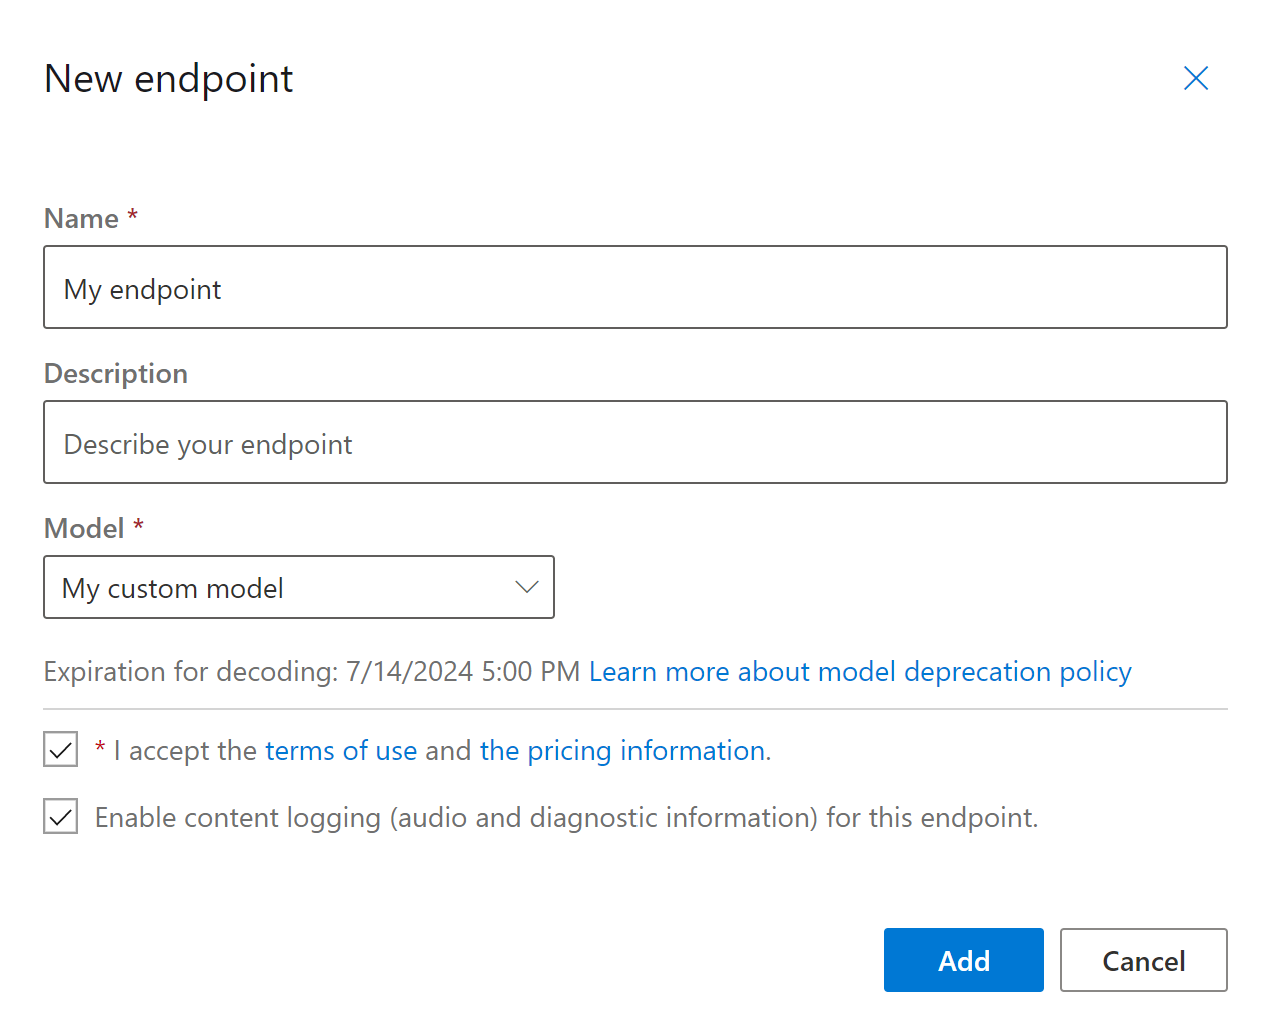 Screenshot showing the selected Log content from this endpoint checkbox on the New endpoint page.